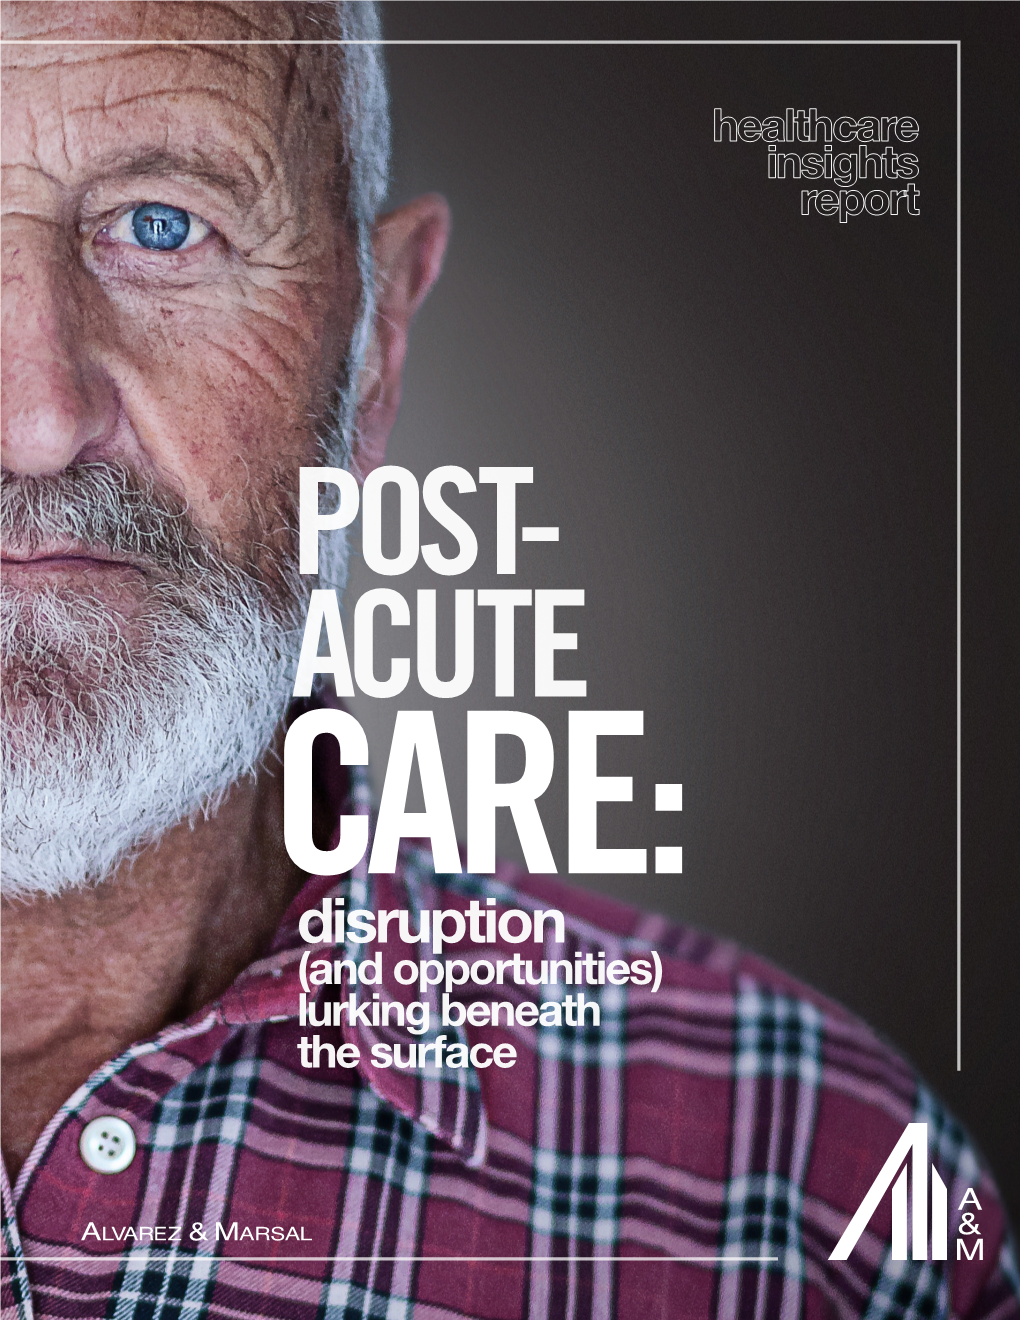 Post-Acute Care: Disruption (And Opportunities) Lurking Beneath the Surface 3 Healthcare: Table of Contents Post-Acute Care: Disruption (And Opportunities)